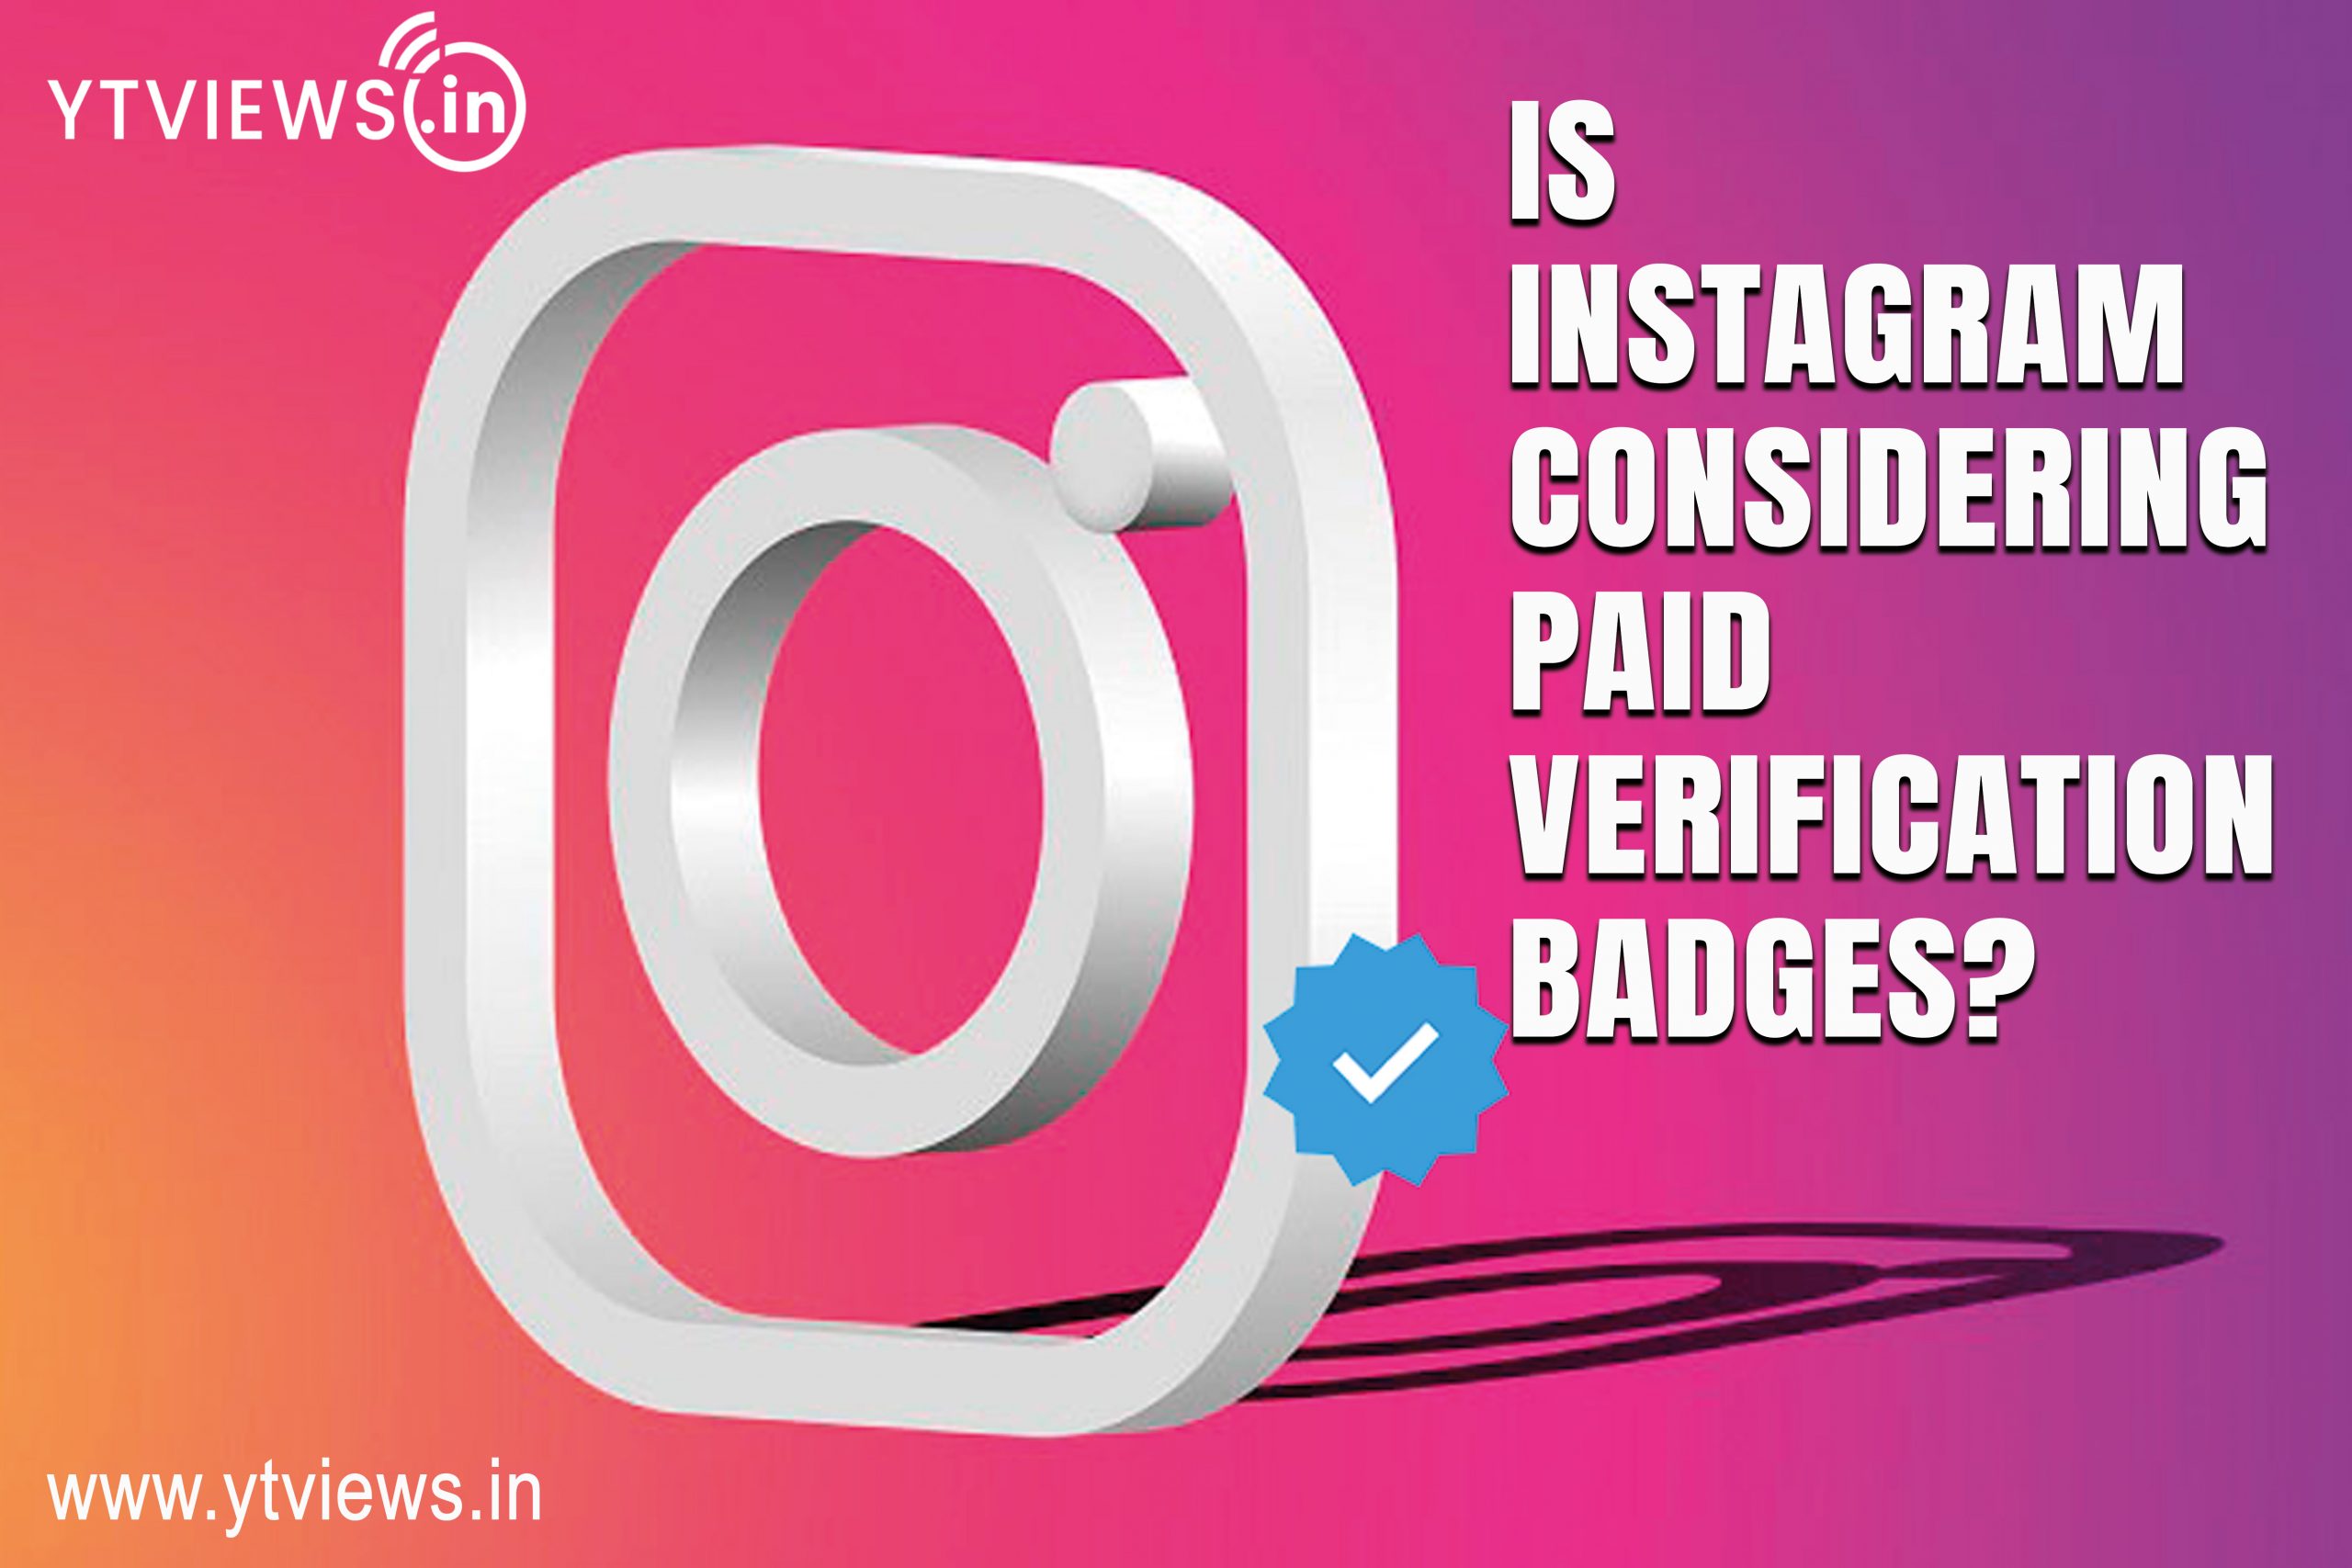 Is Instagram considering paid verification badges?